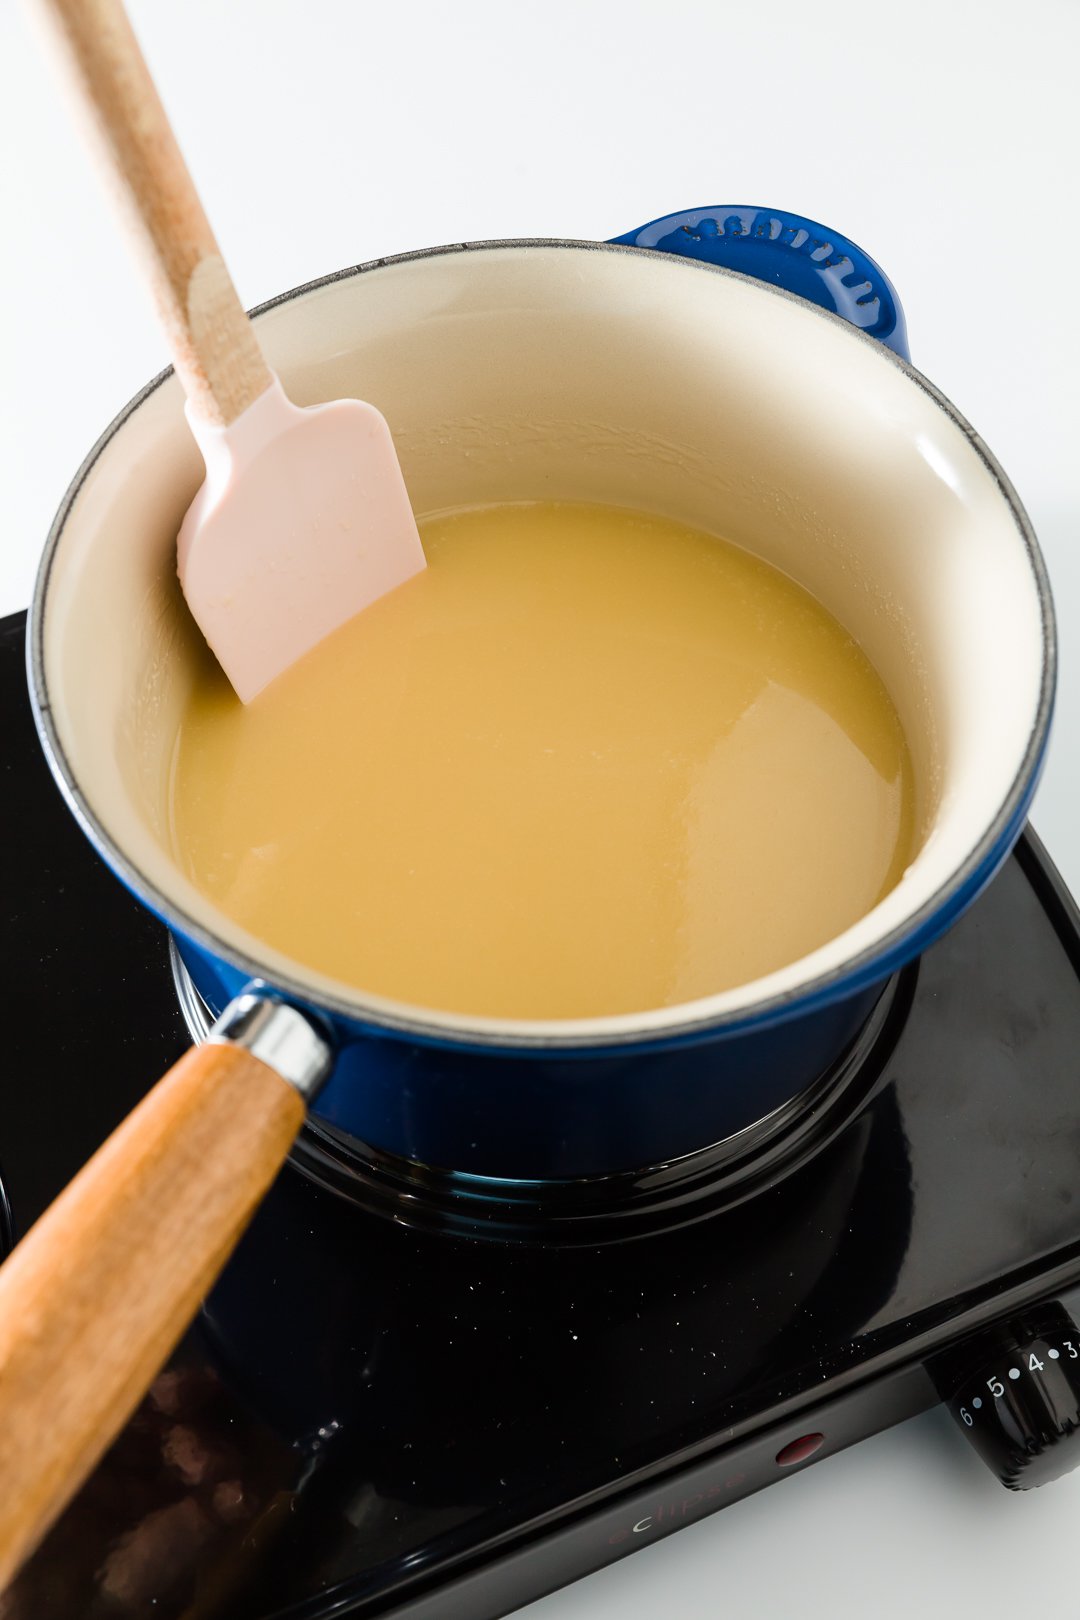 Butter, sugar, and evaporated milk melted in a saucepan